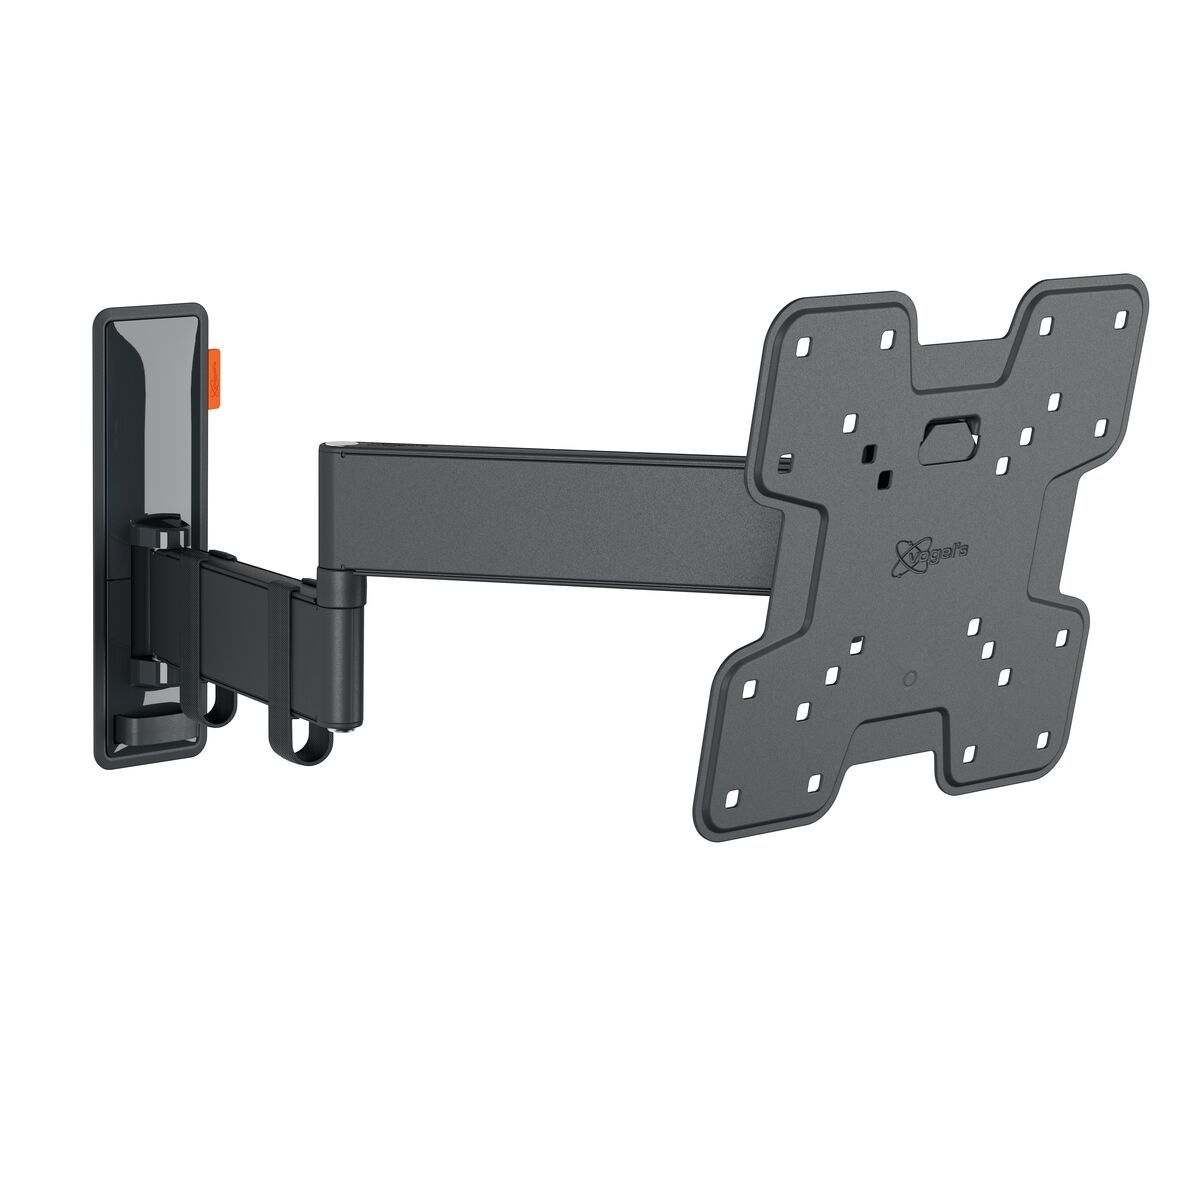 Vogel's TVM 3245 Full-Motion TV Wall Mount (black) - Suitable for 19 up to 43 inch TVs - Full motion (up to 180°) swivel - Tilt up to 20° - Product